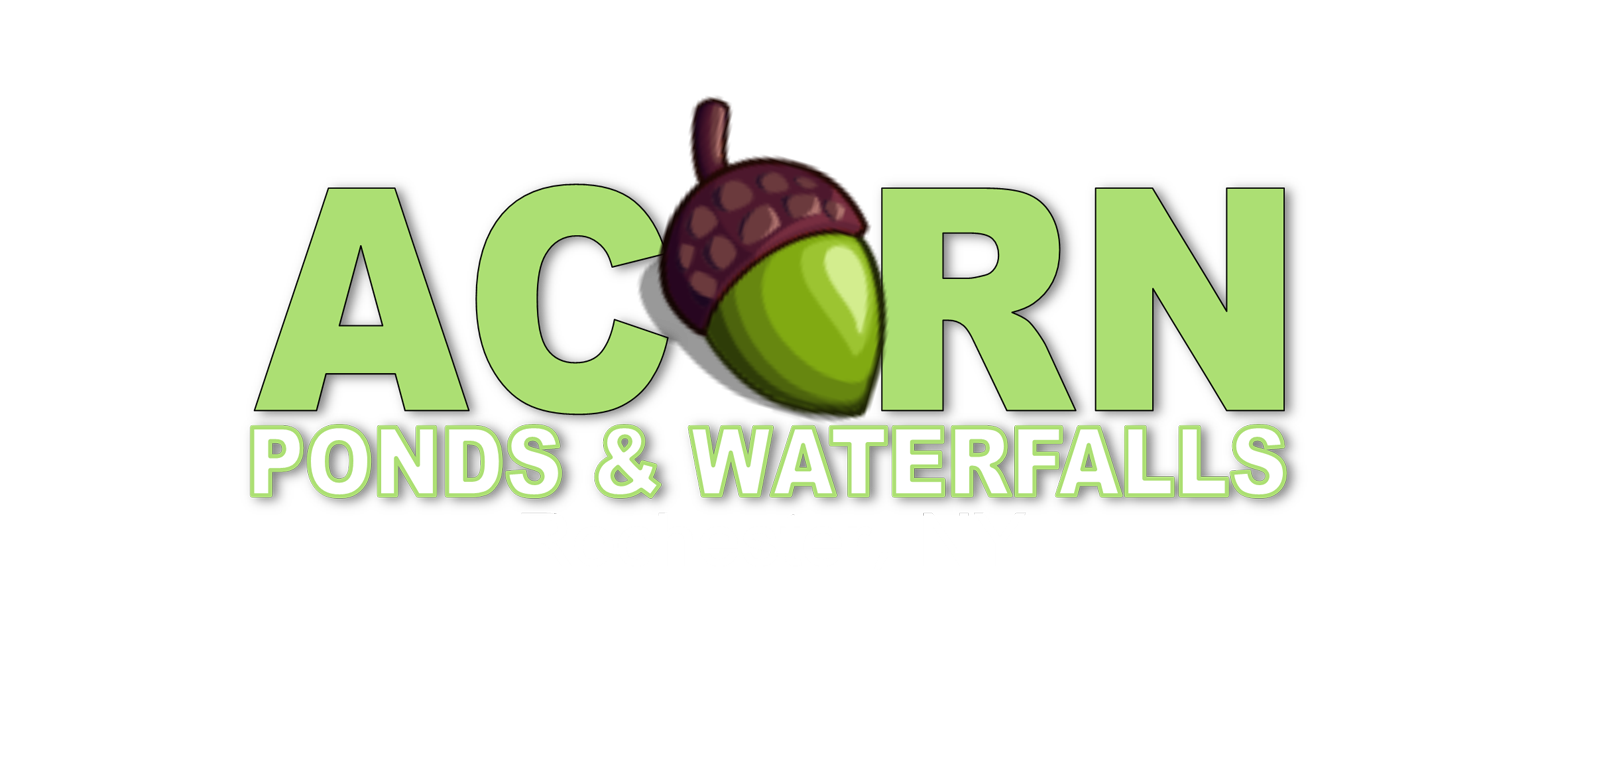 Waterfall Pond Builder, Repair & Renovation Contractor Rochester NY - Acorn Ponds & Waterfalls